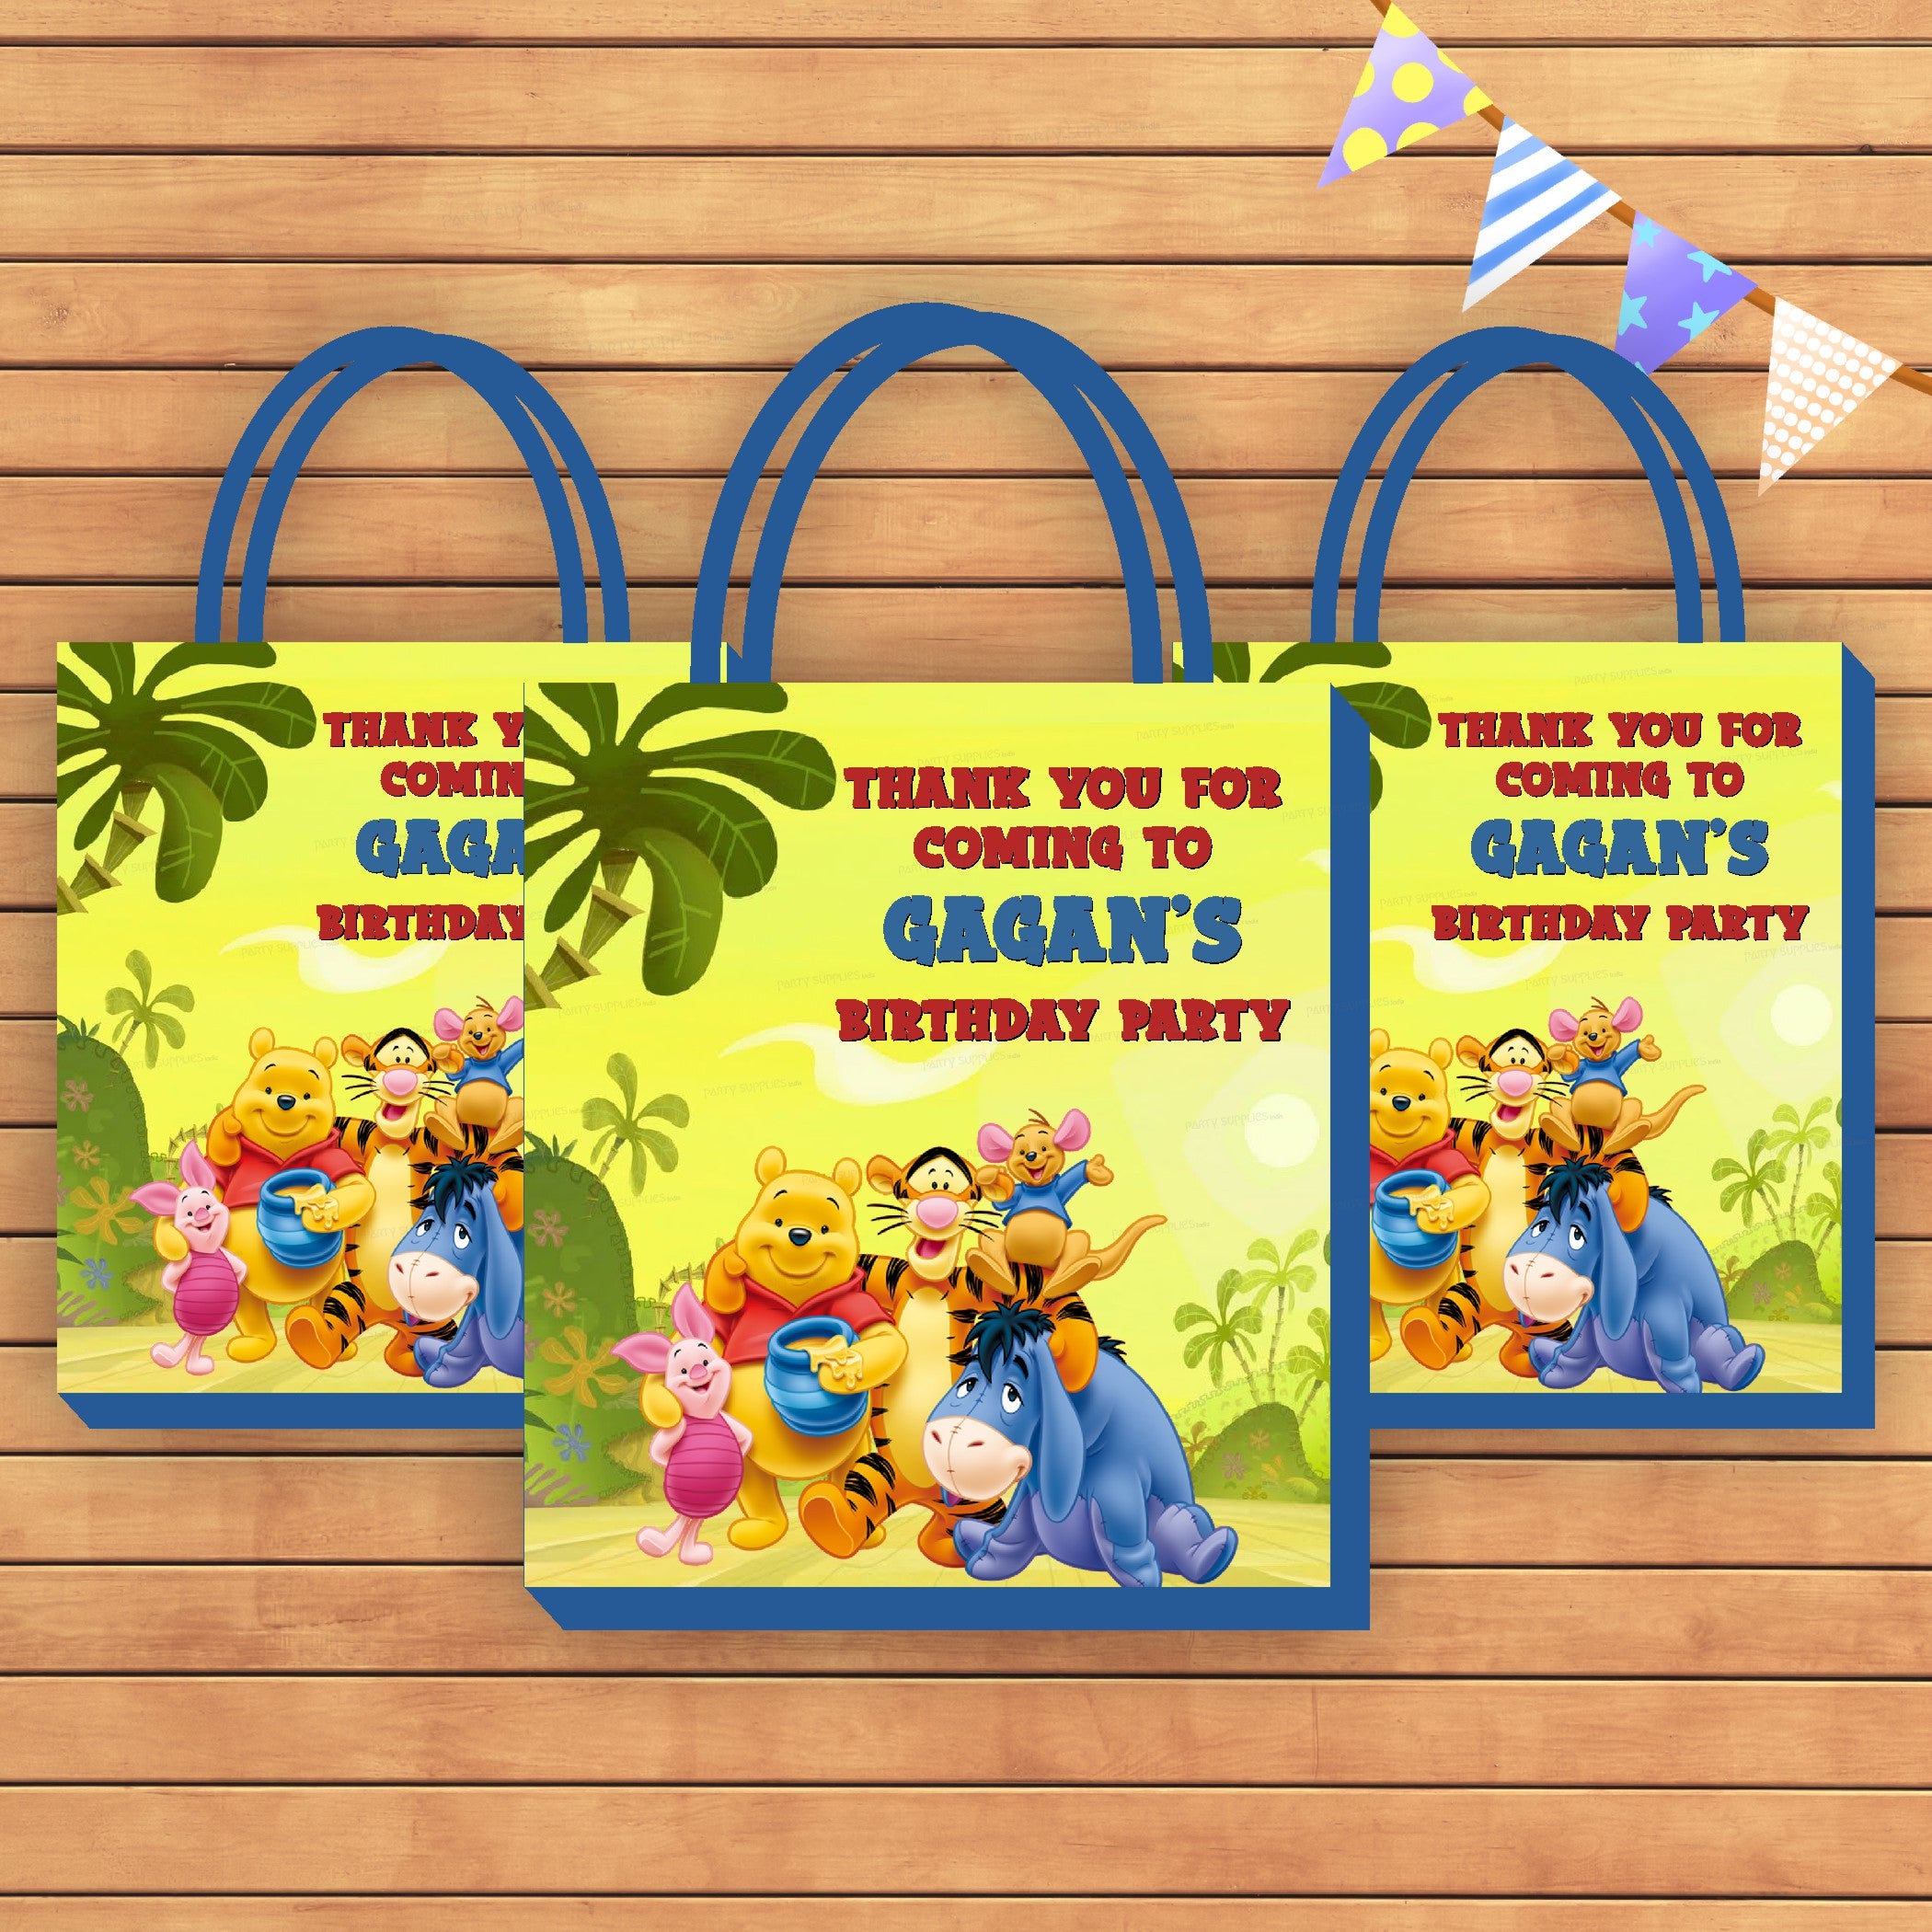 Winnie The Pooh goodie bags 12 Premium Quality Party Favor